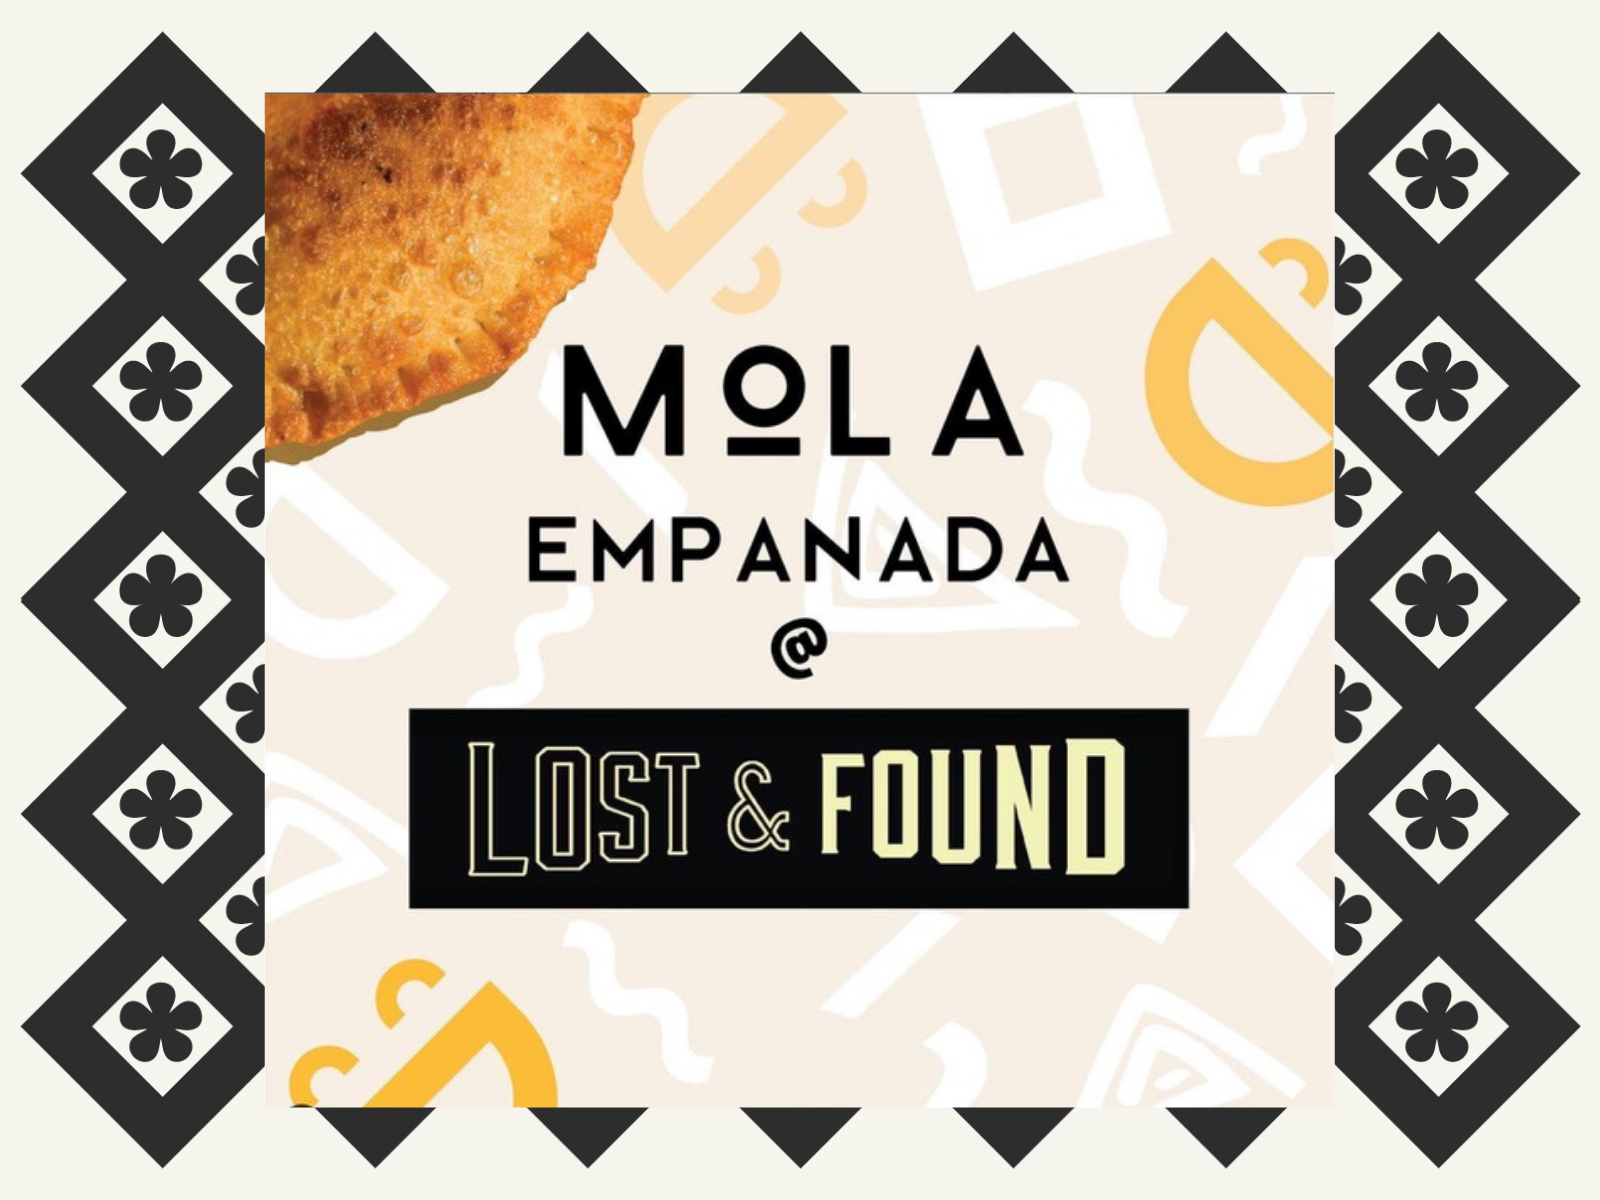 Logos for Mola Empanada and Lost & Found displayed against a black and white background